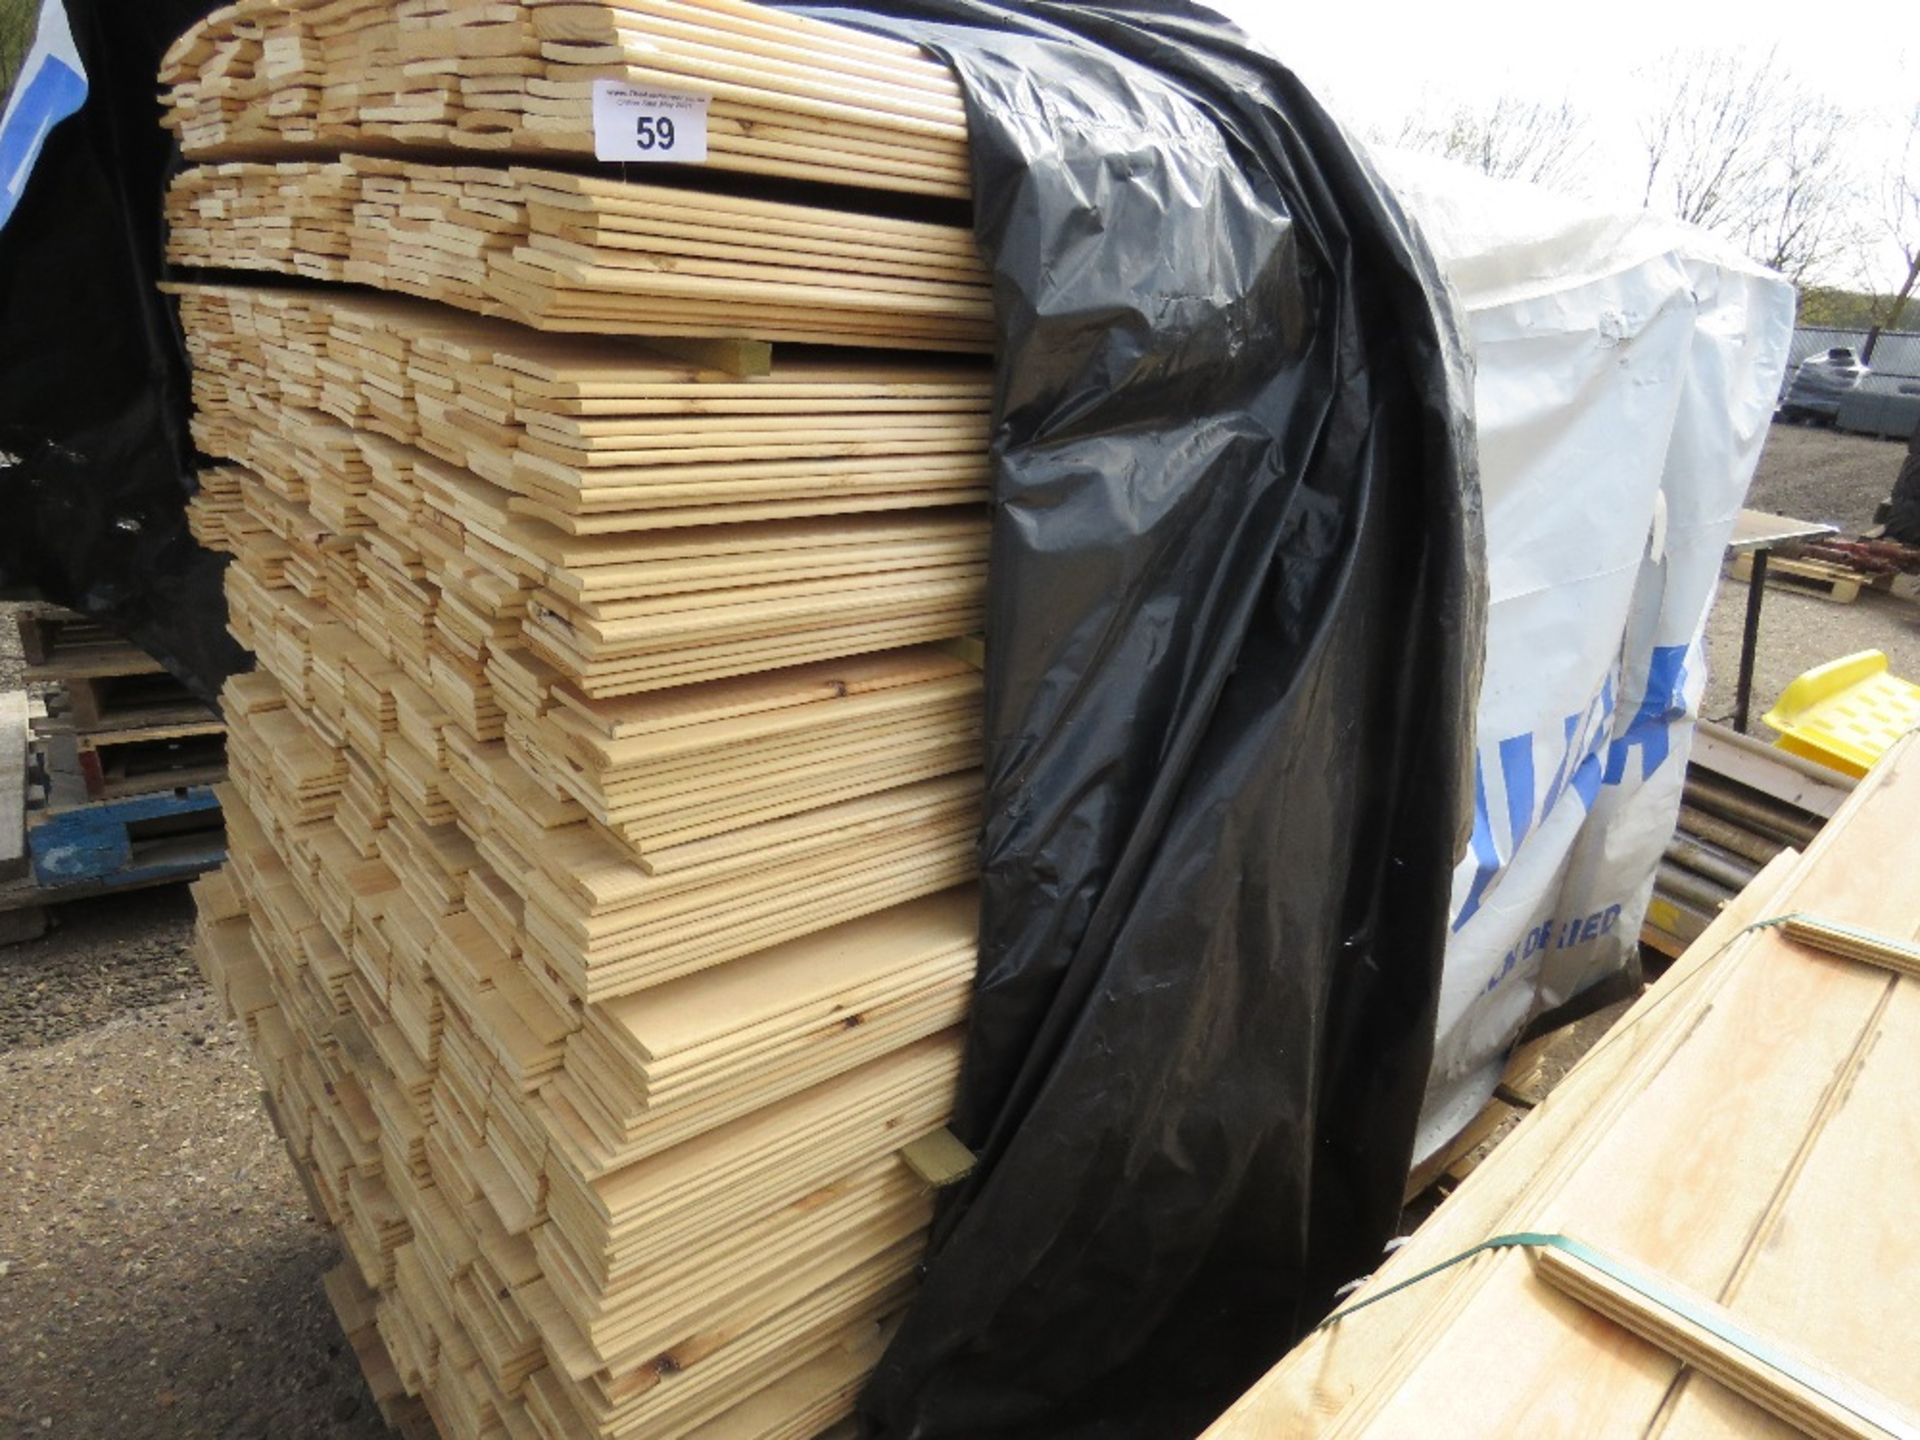 EXTRA LARGE PACK OF FLAT MACHINED FINISH CLADDING TIMBER BOARDS 1.75M X 9.5CM APPROX, UNTREATED.